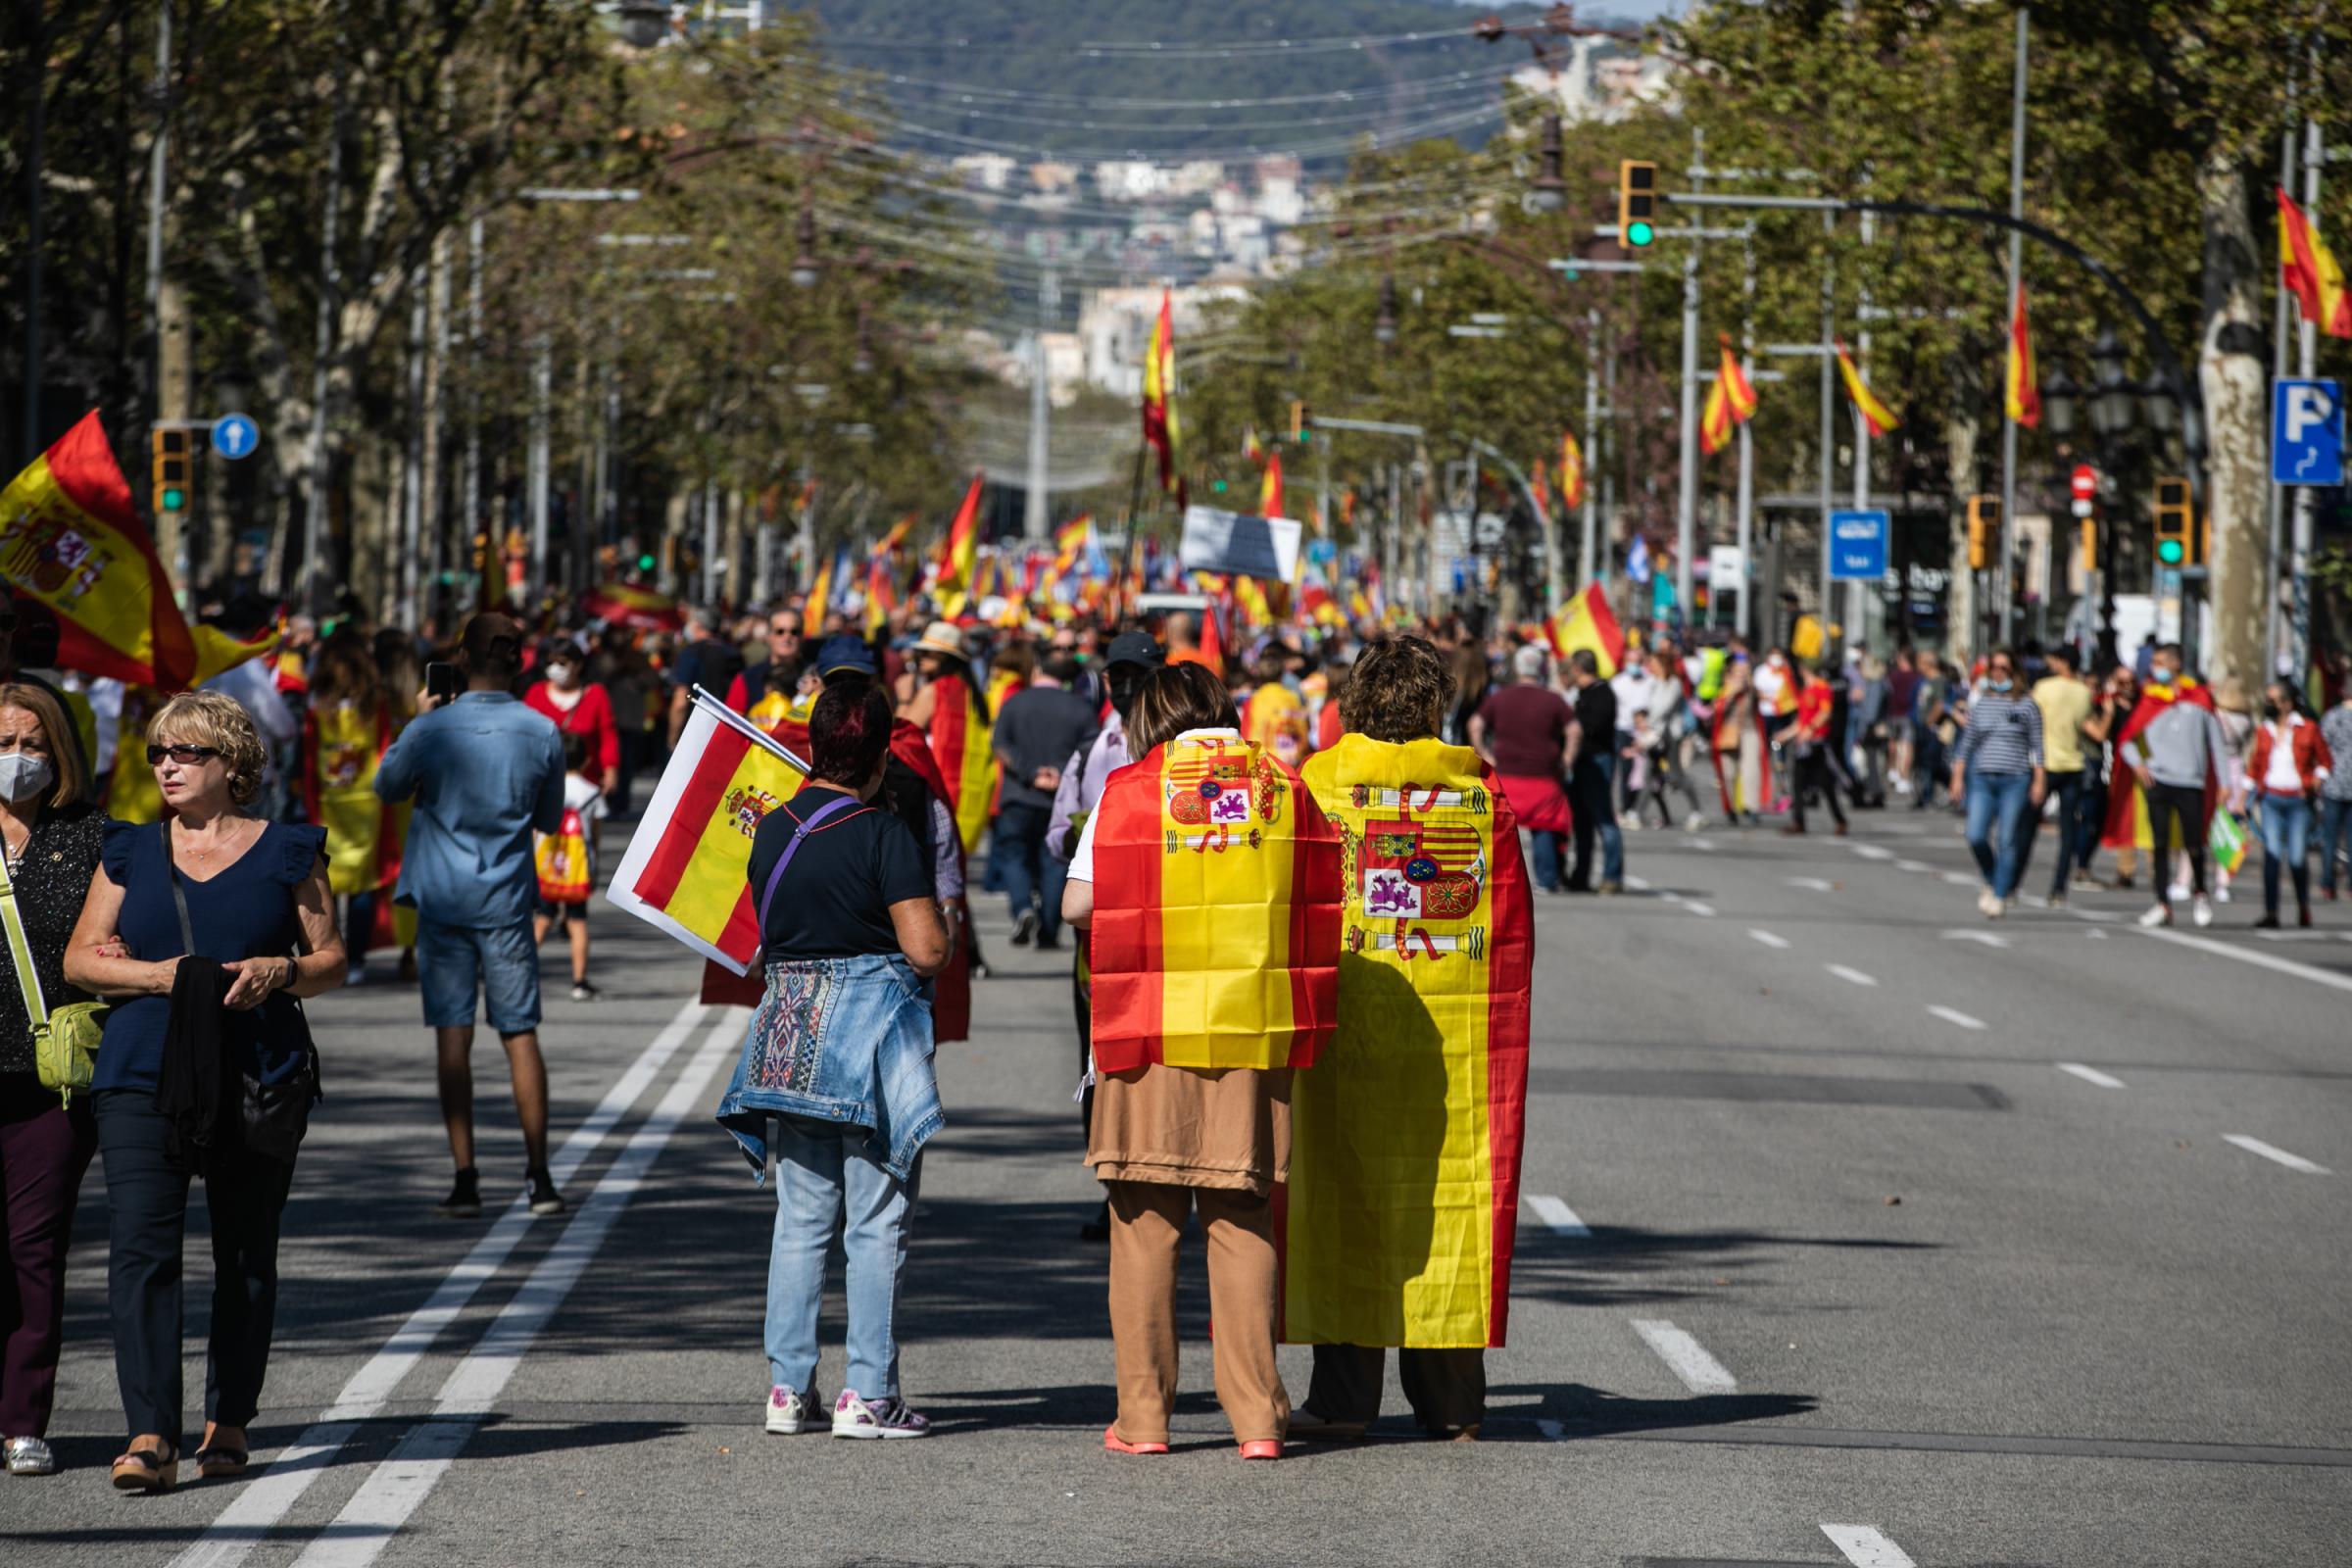 Spain's National Day Overshadowed By Colonialist Past  - BARCELONA, SPAIN - OCTOBER 12: A group of demonstrators...